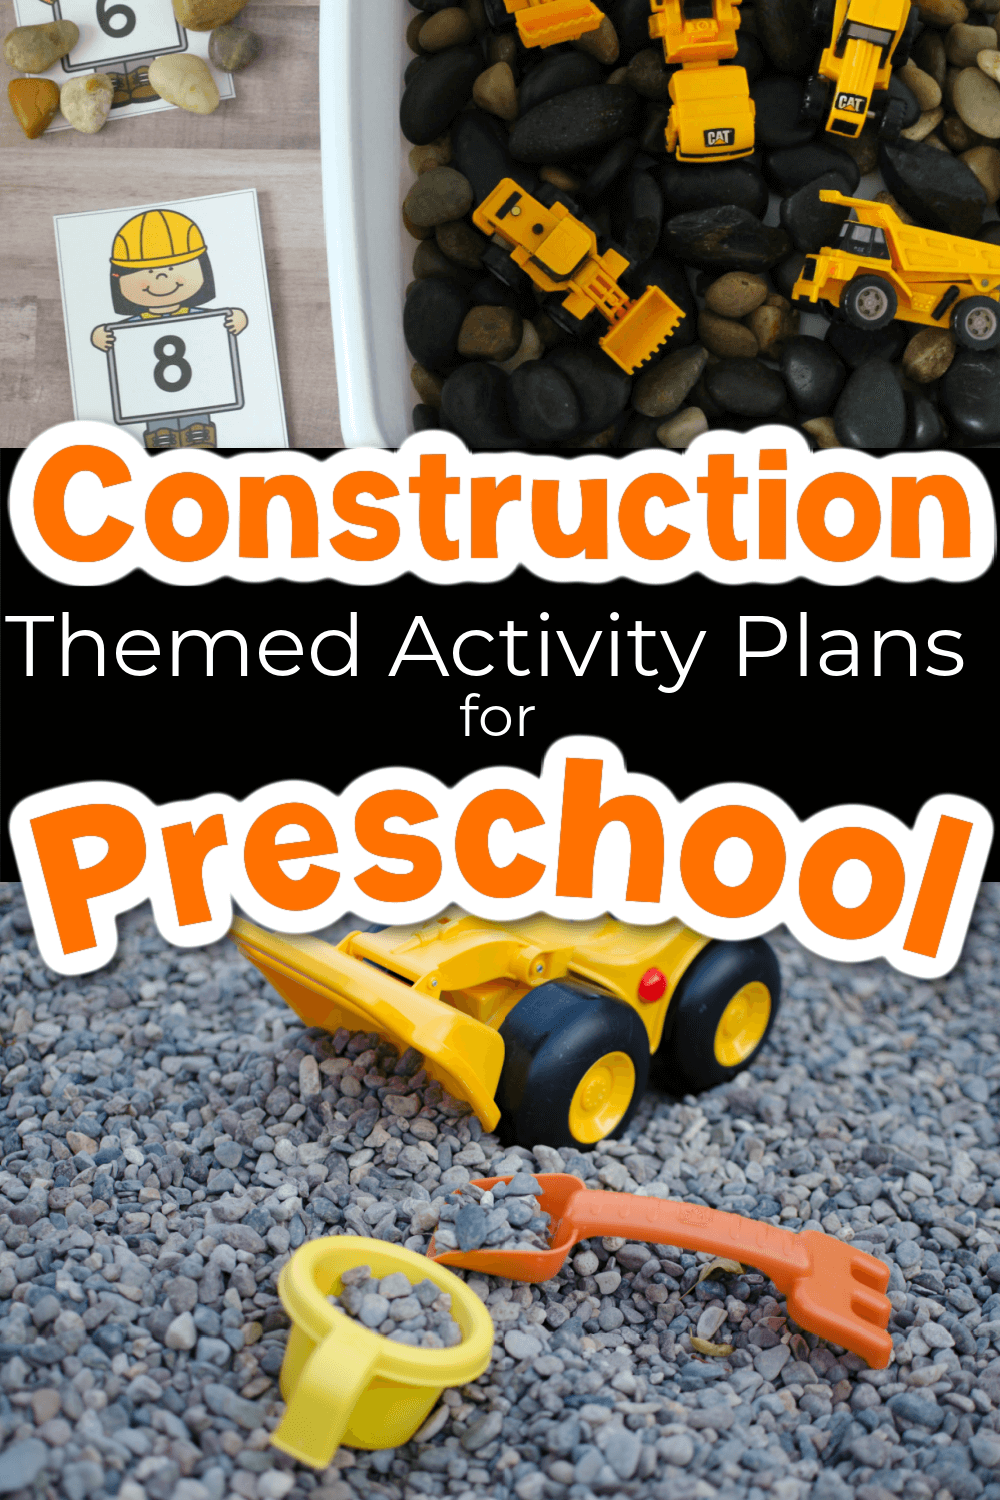 Construction themed activity plans for preschool showing two sensory bins